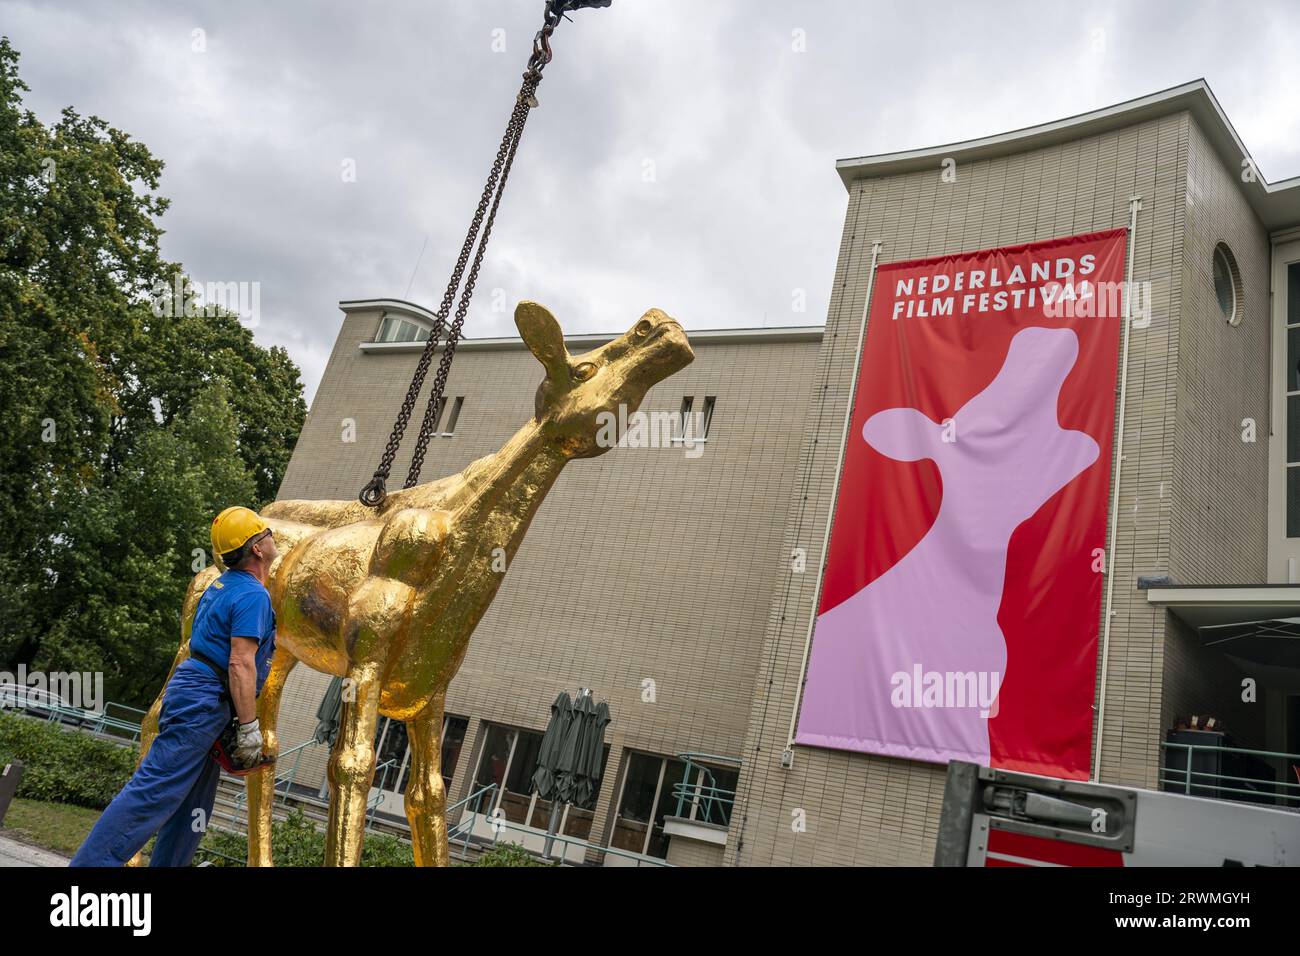 UTRECHT - The installation of the large Golden Calf statue, the icon of the Dutch Film Festival (NFF) at the Stadschouwburg Utrecht. Utrecht will be renamed the film capital of the Netherlands for a week and a half, where the latest feature films, documentaries, animations, short films, series and VR productions are presented. ANP JEROEN JUMELET netherlands out - belgium out Stock Photo